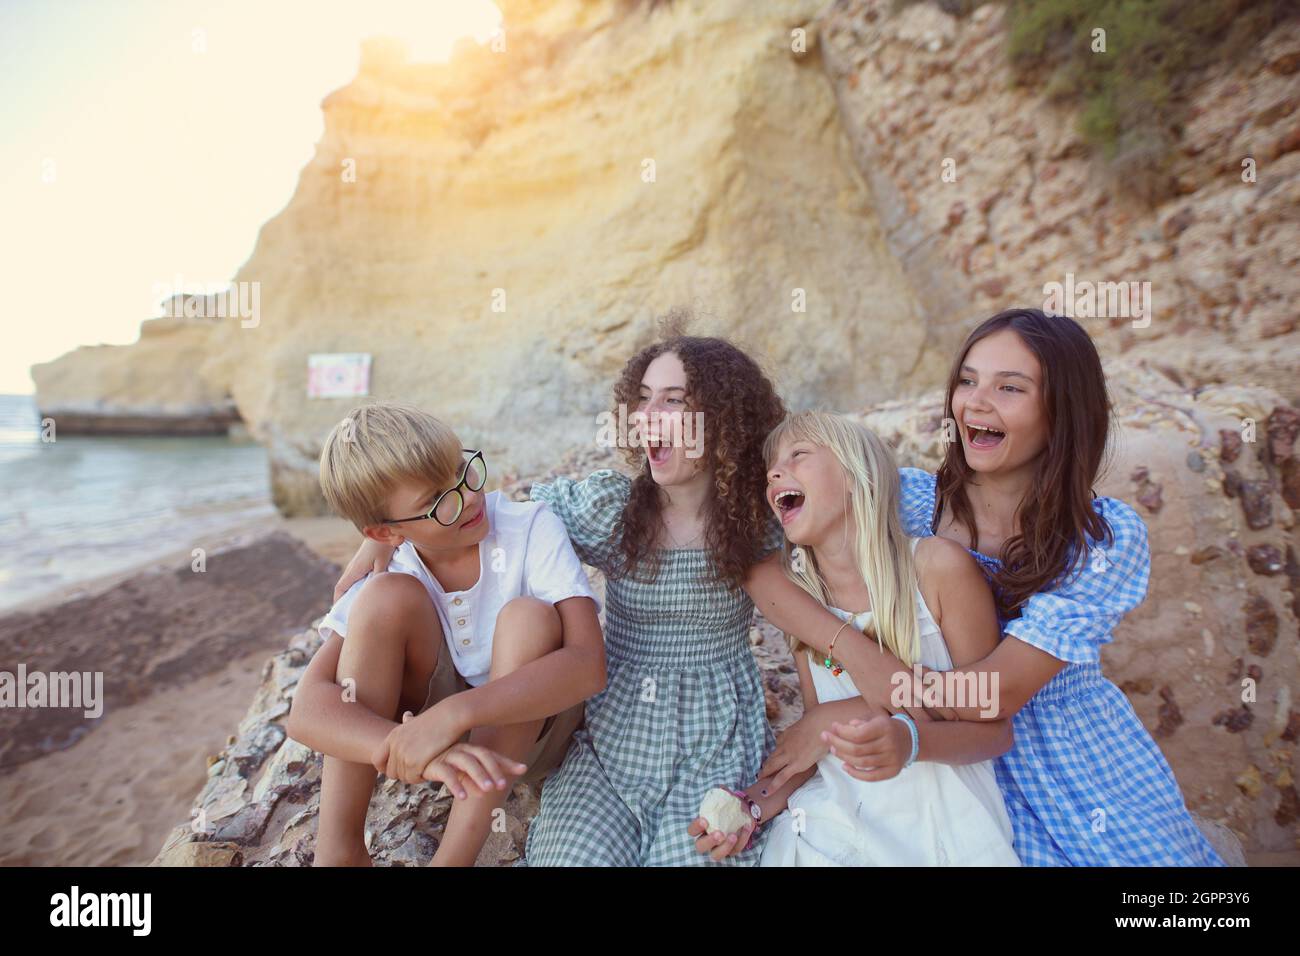 young friends are laughing on the beach by the cliffs Stock Photo